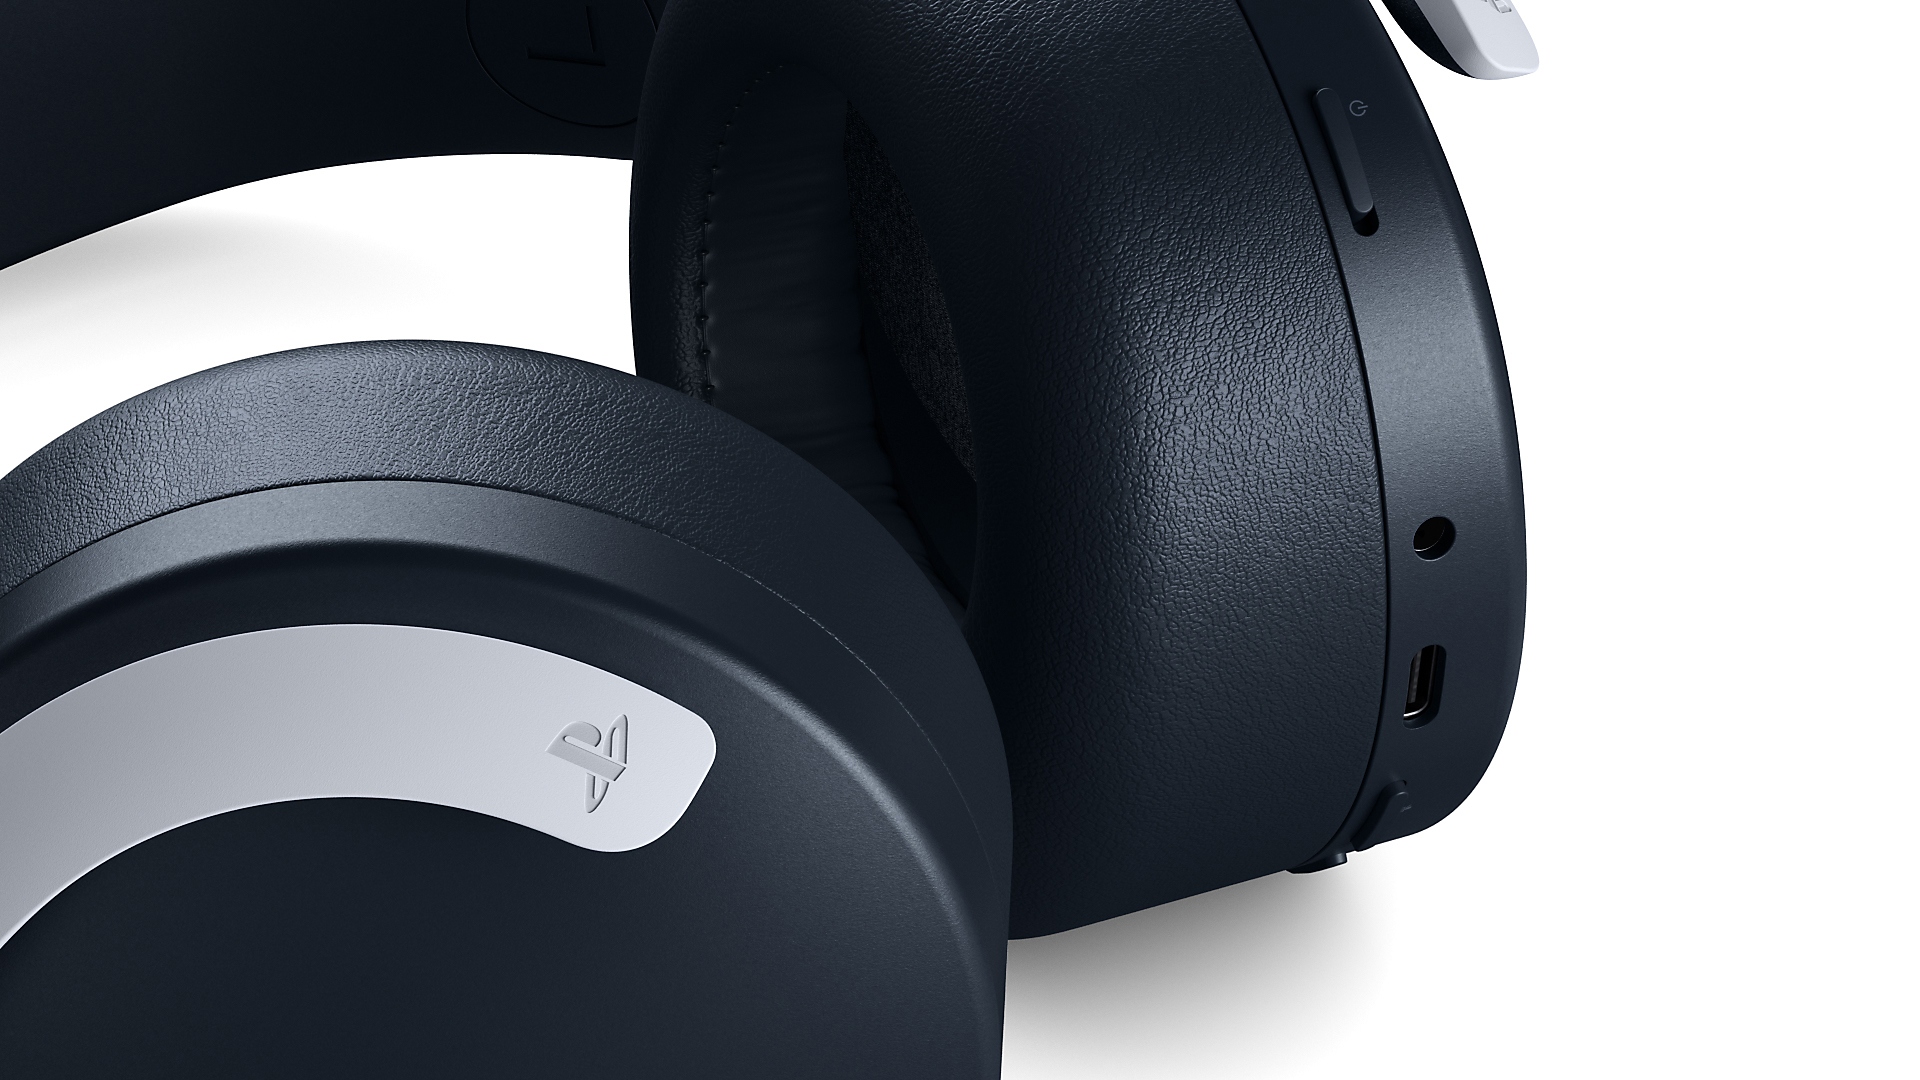 PULSE 3D wireless headset | The official 3D audio headset for PS5 